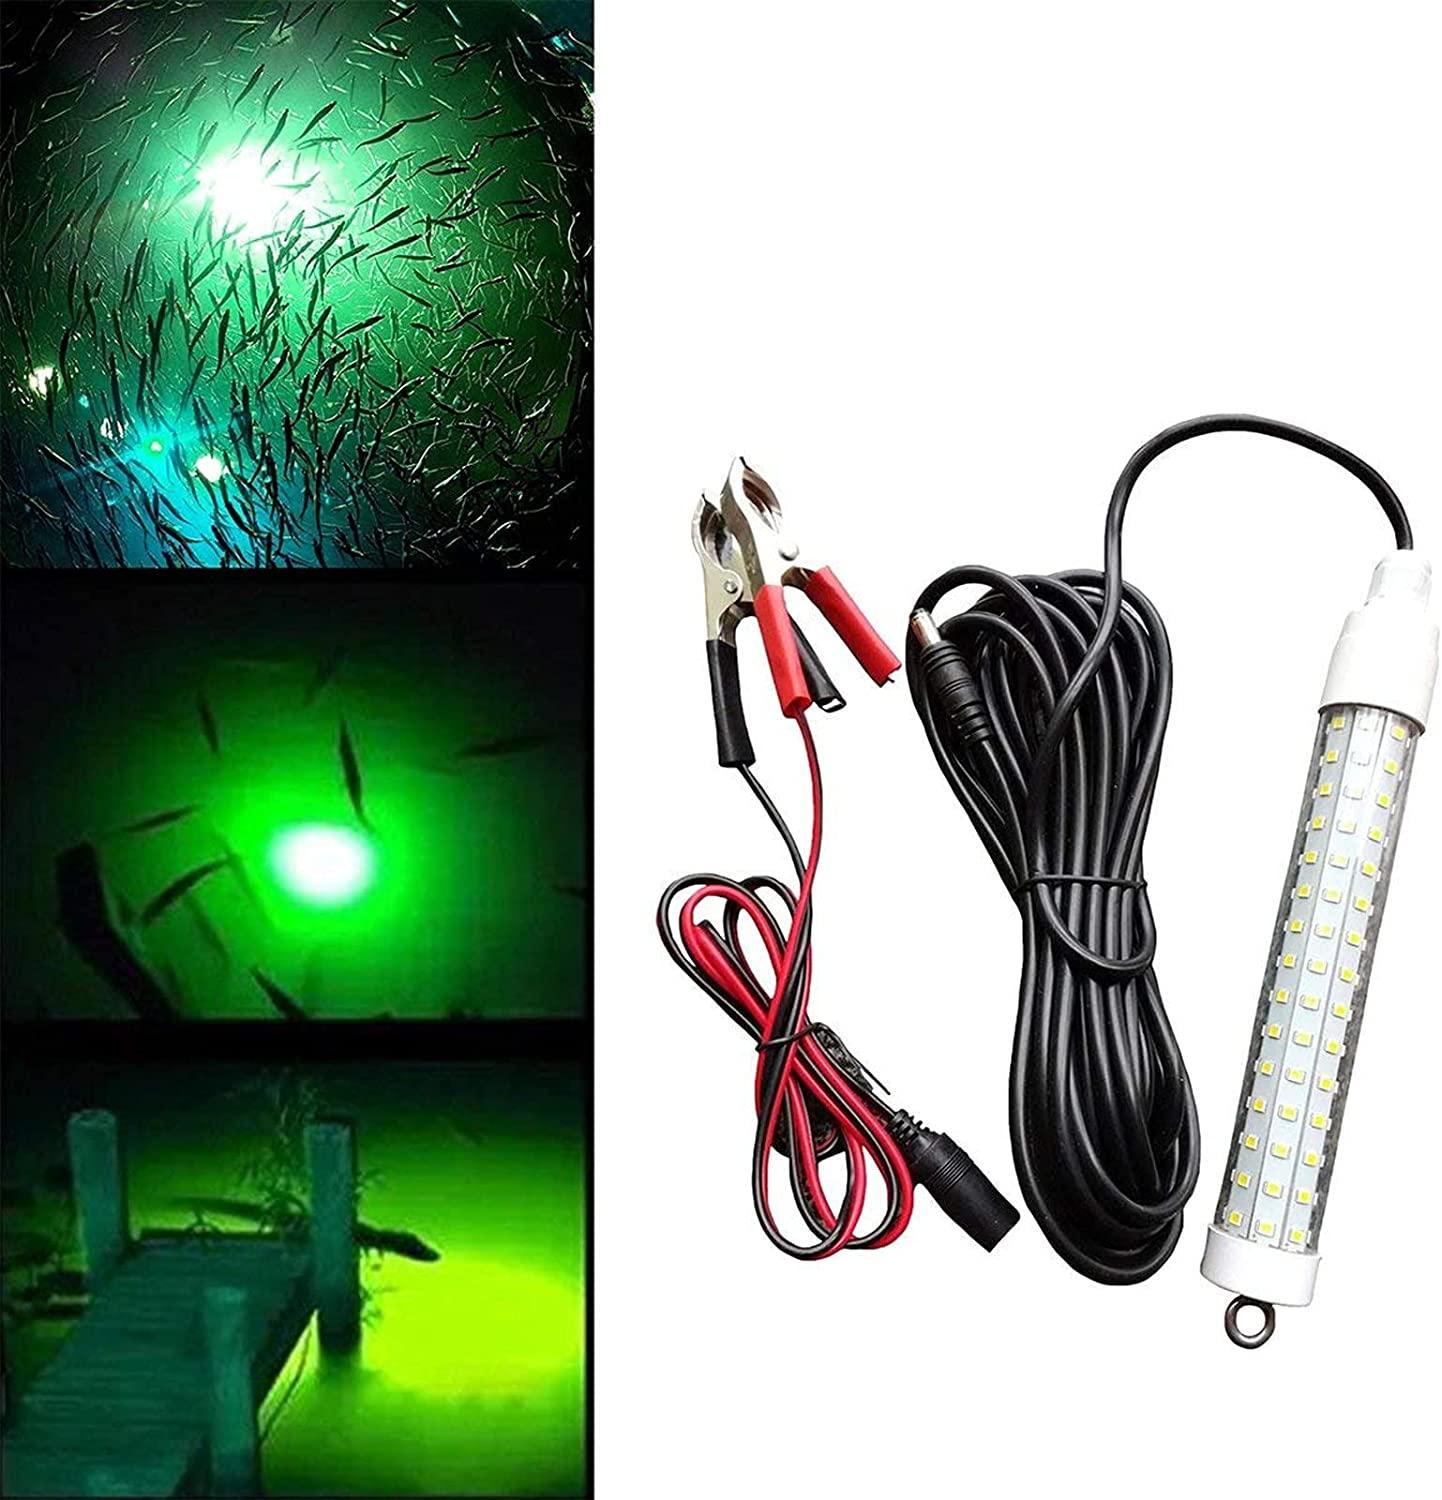 barm ørn Arthur 12V 120 LED Submersible Fishing Light Underwater Fish Finder Lamp, Night  Fishing Lure Bait Finder Crappie Boat Ice Fishing Light Attractants More  Fish in Freshwater & Saltwater, with 6M Power Cord